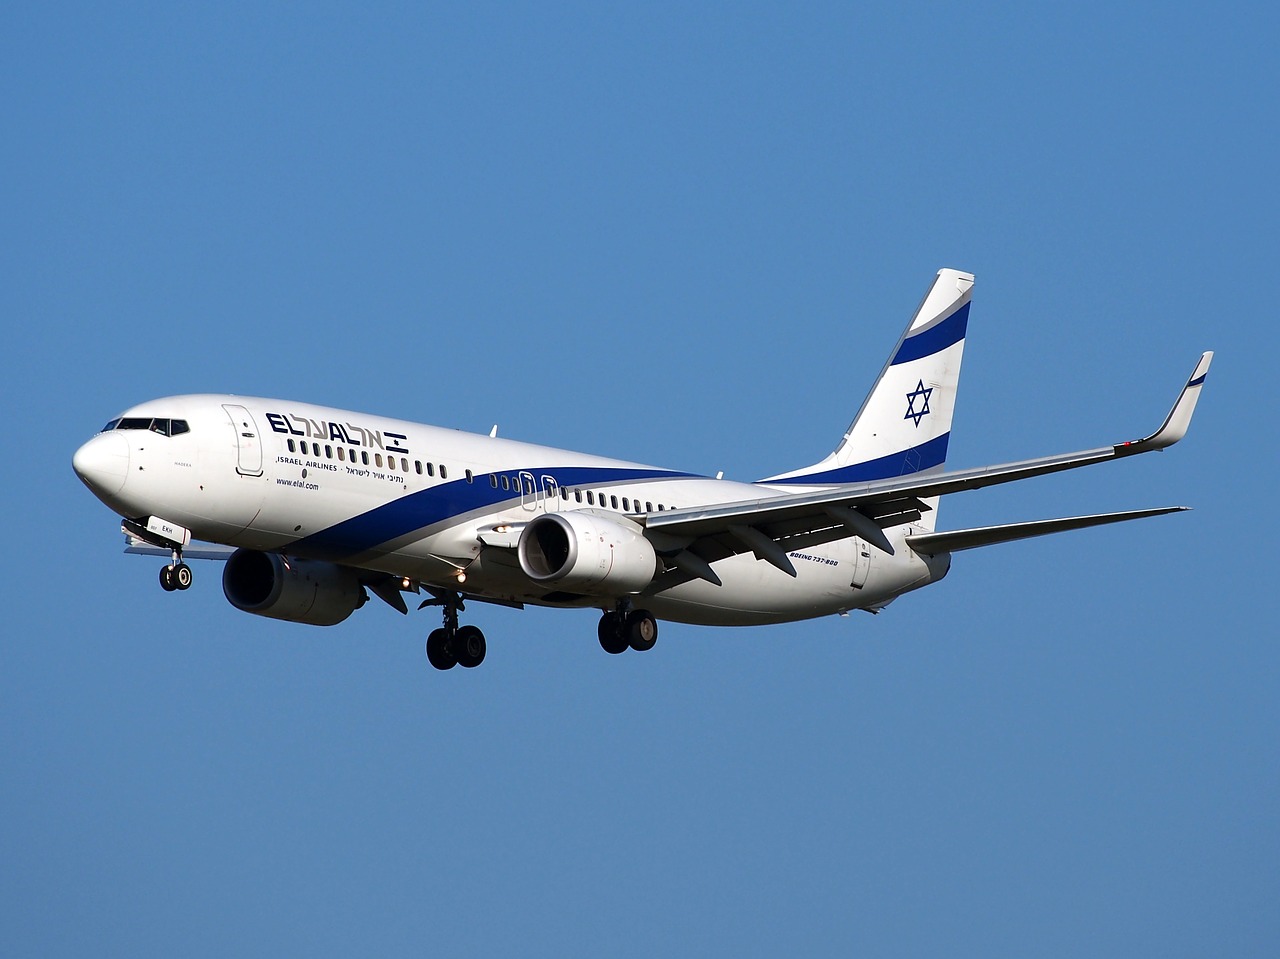 boeing 737 israeli airlines take off free photo